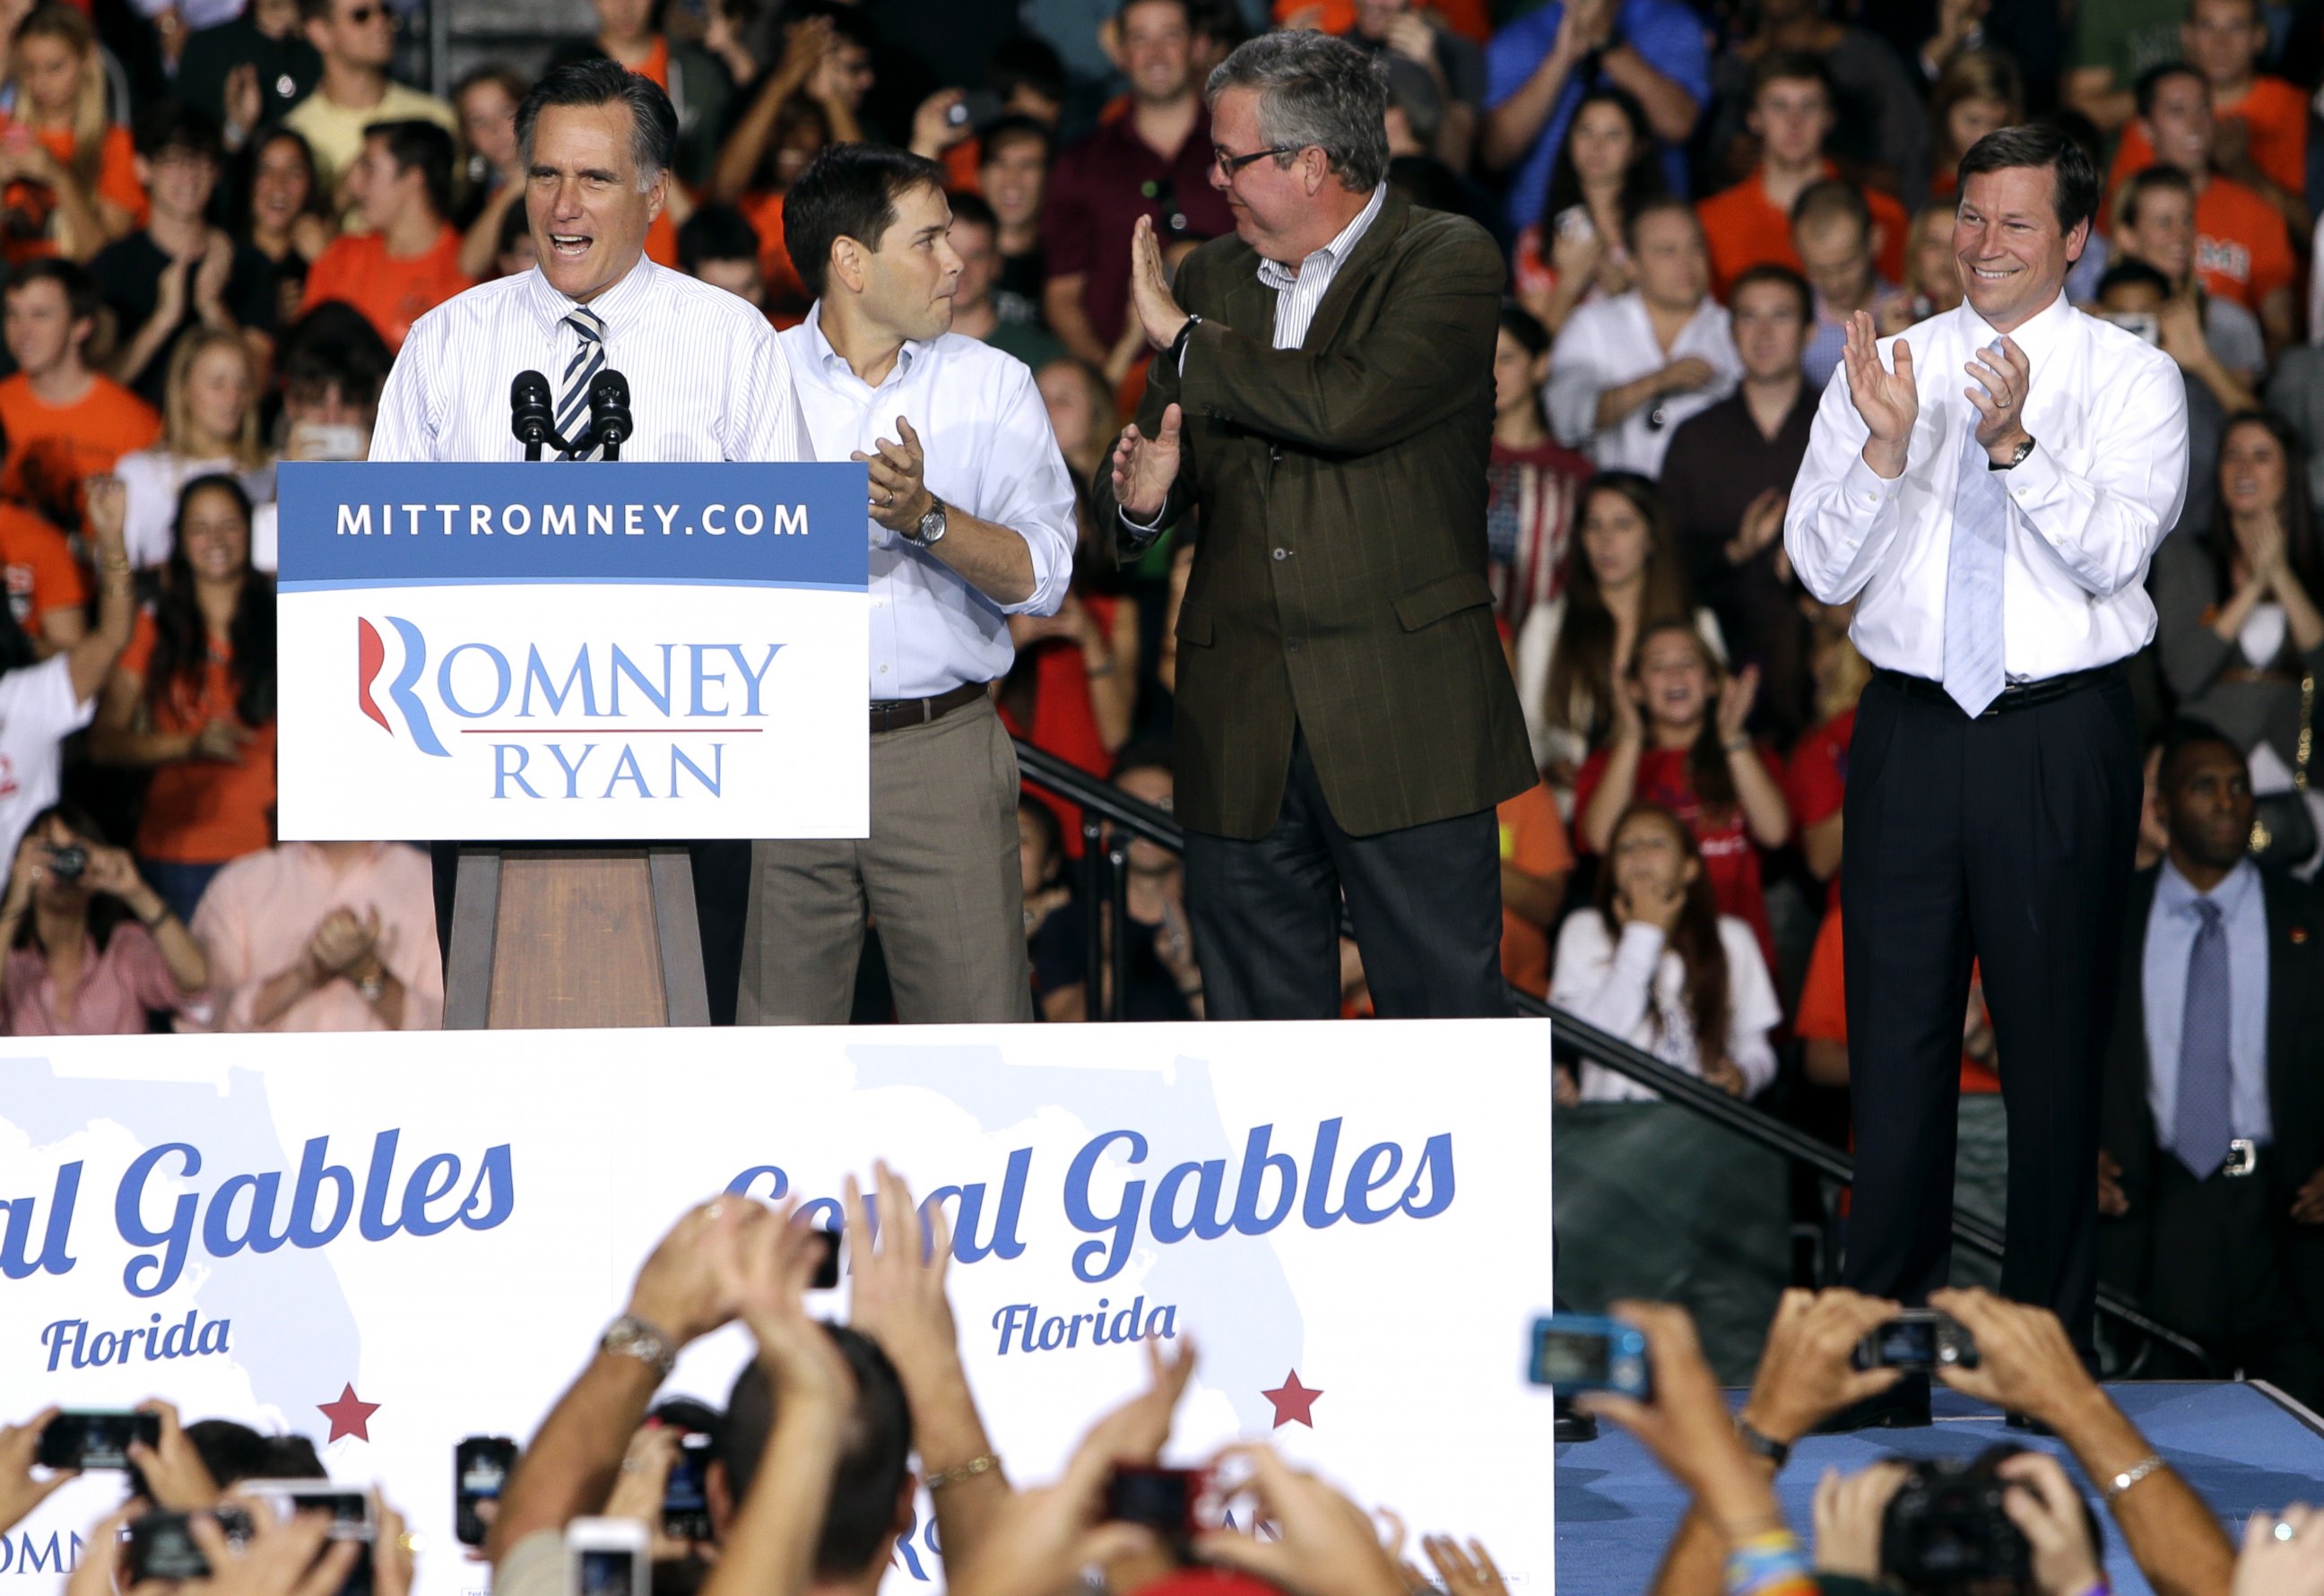 PHOTO: From left, Mitt Romney, Marco Rubio, Jeb Bush, and Connie Mack are pictured at the University of Miami on Oct. 31, 2012 in Coral Gables, Fla.